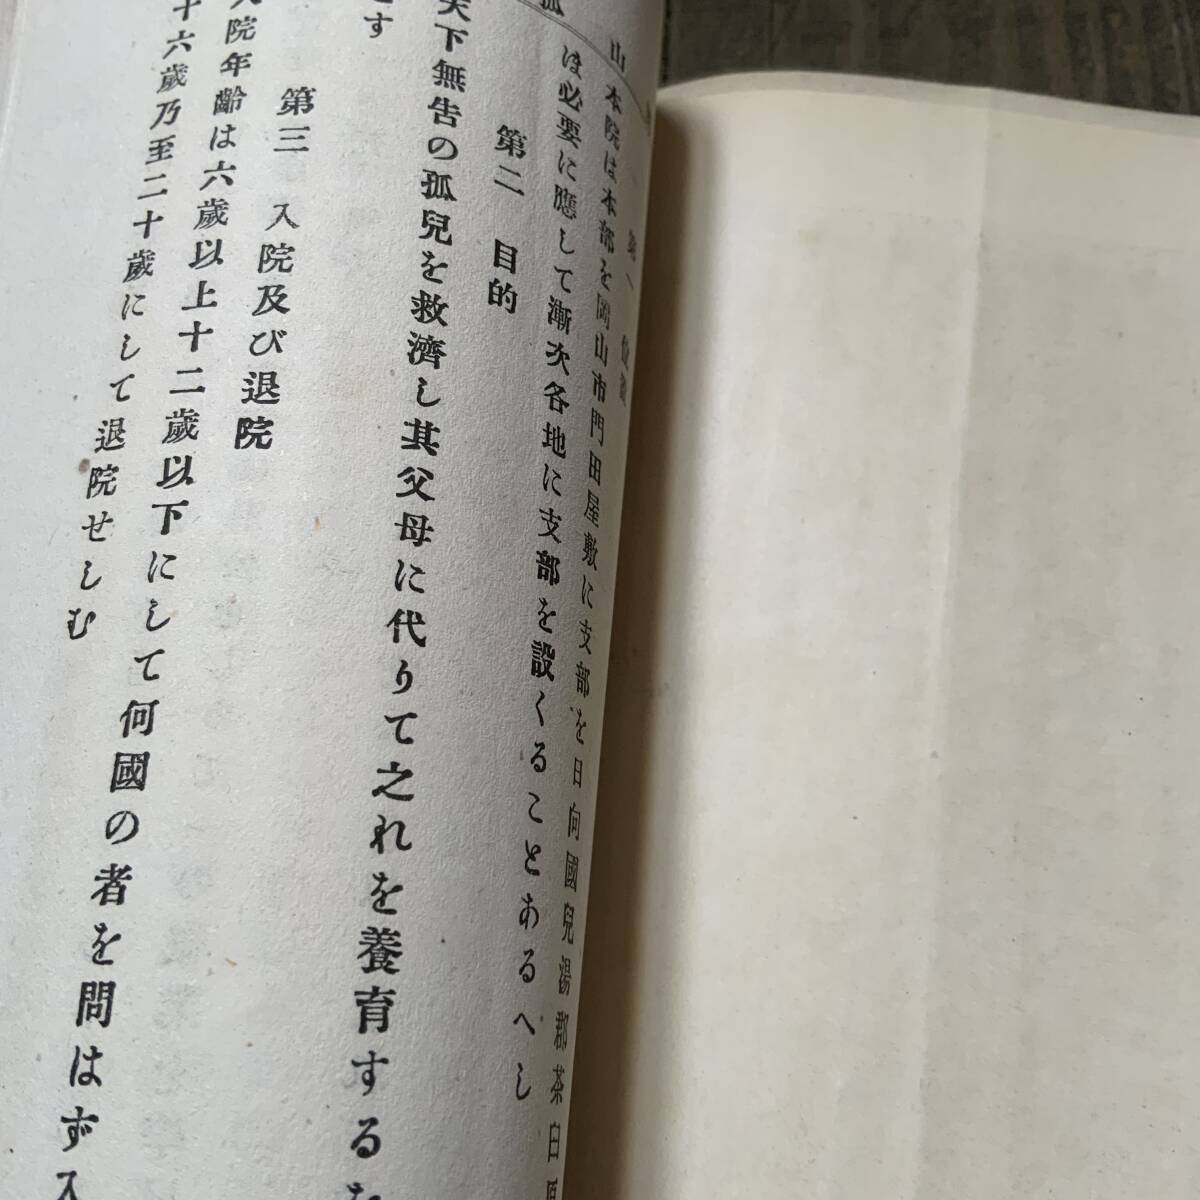  Meiji 31 year the first version . attaching paper attaching [ new . Okayama ... all ] Ishii 10 next * valuable materials war front rare at that time 